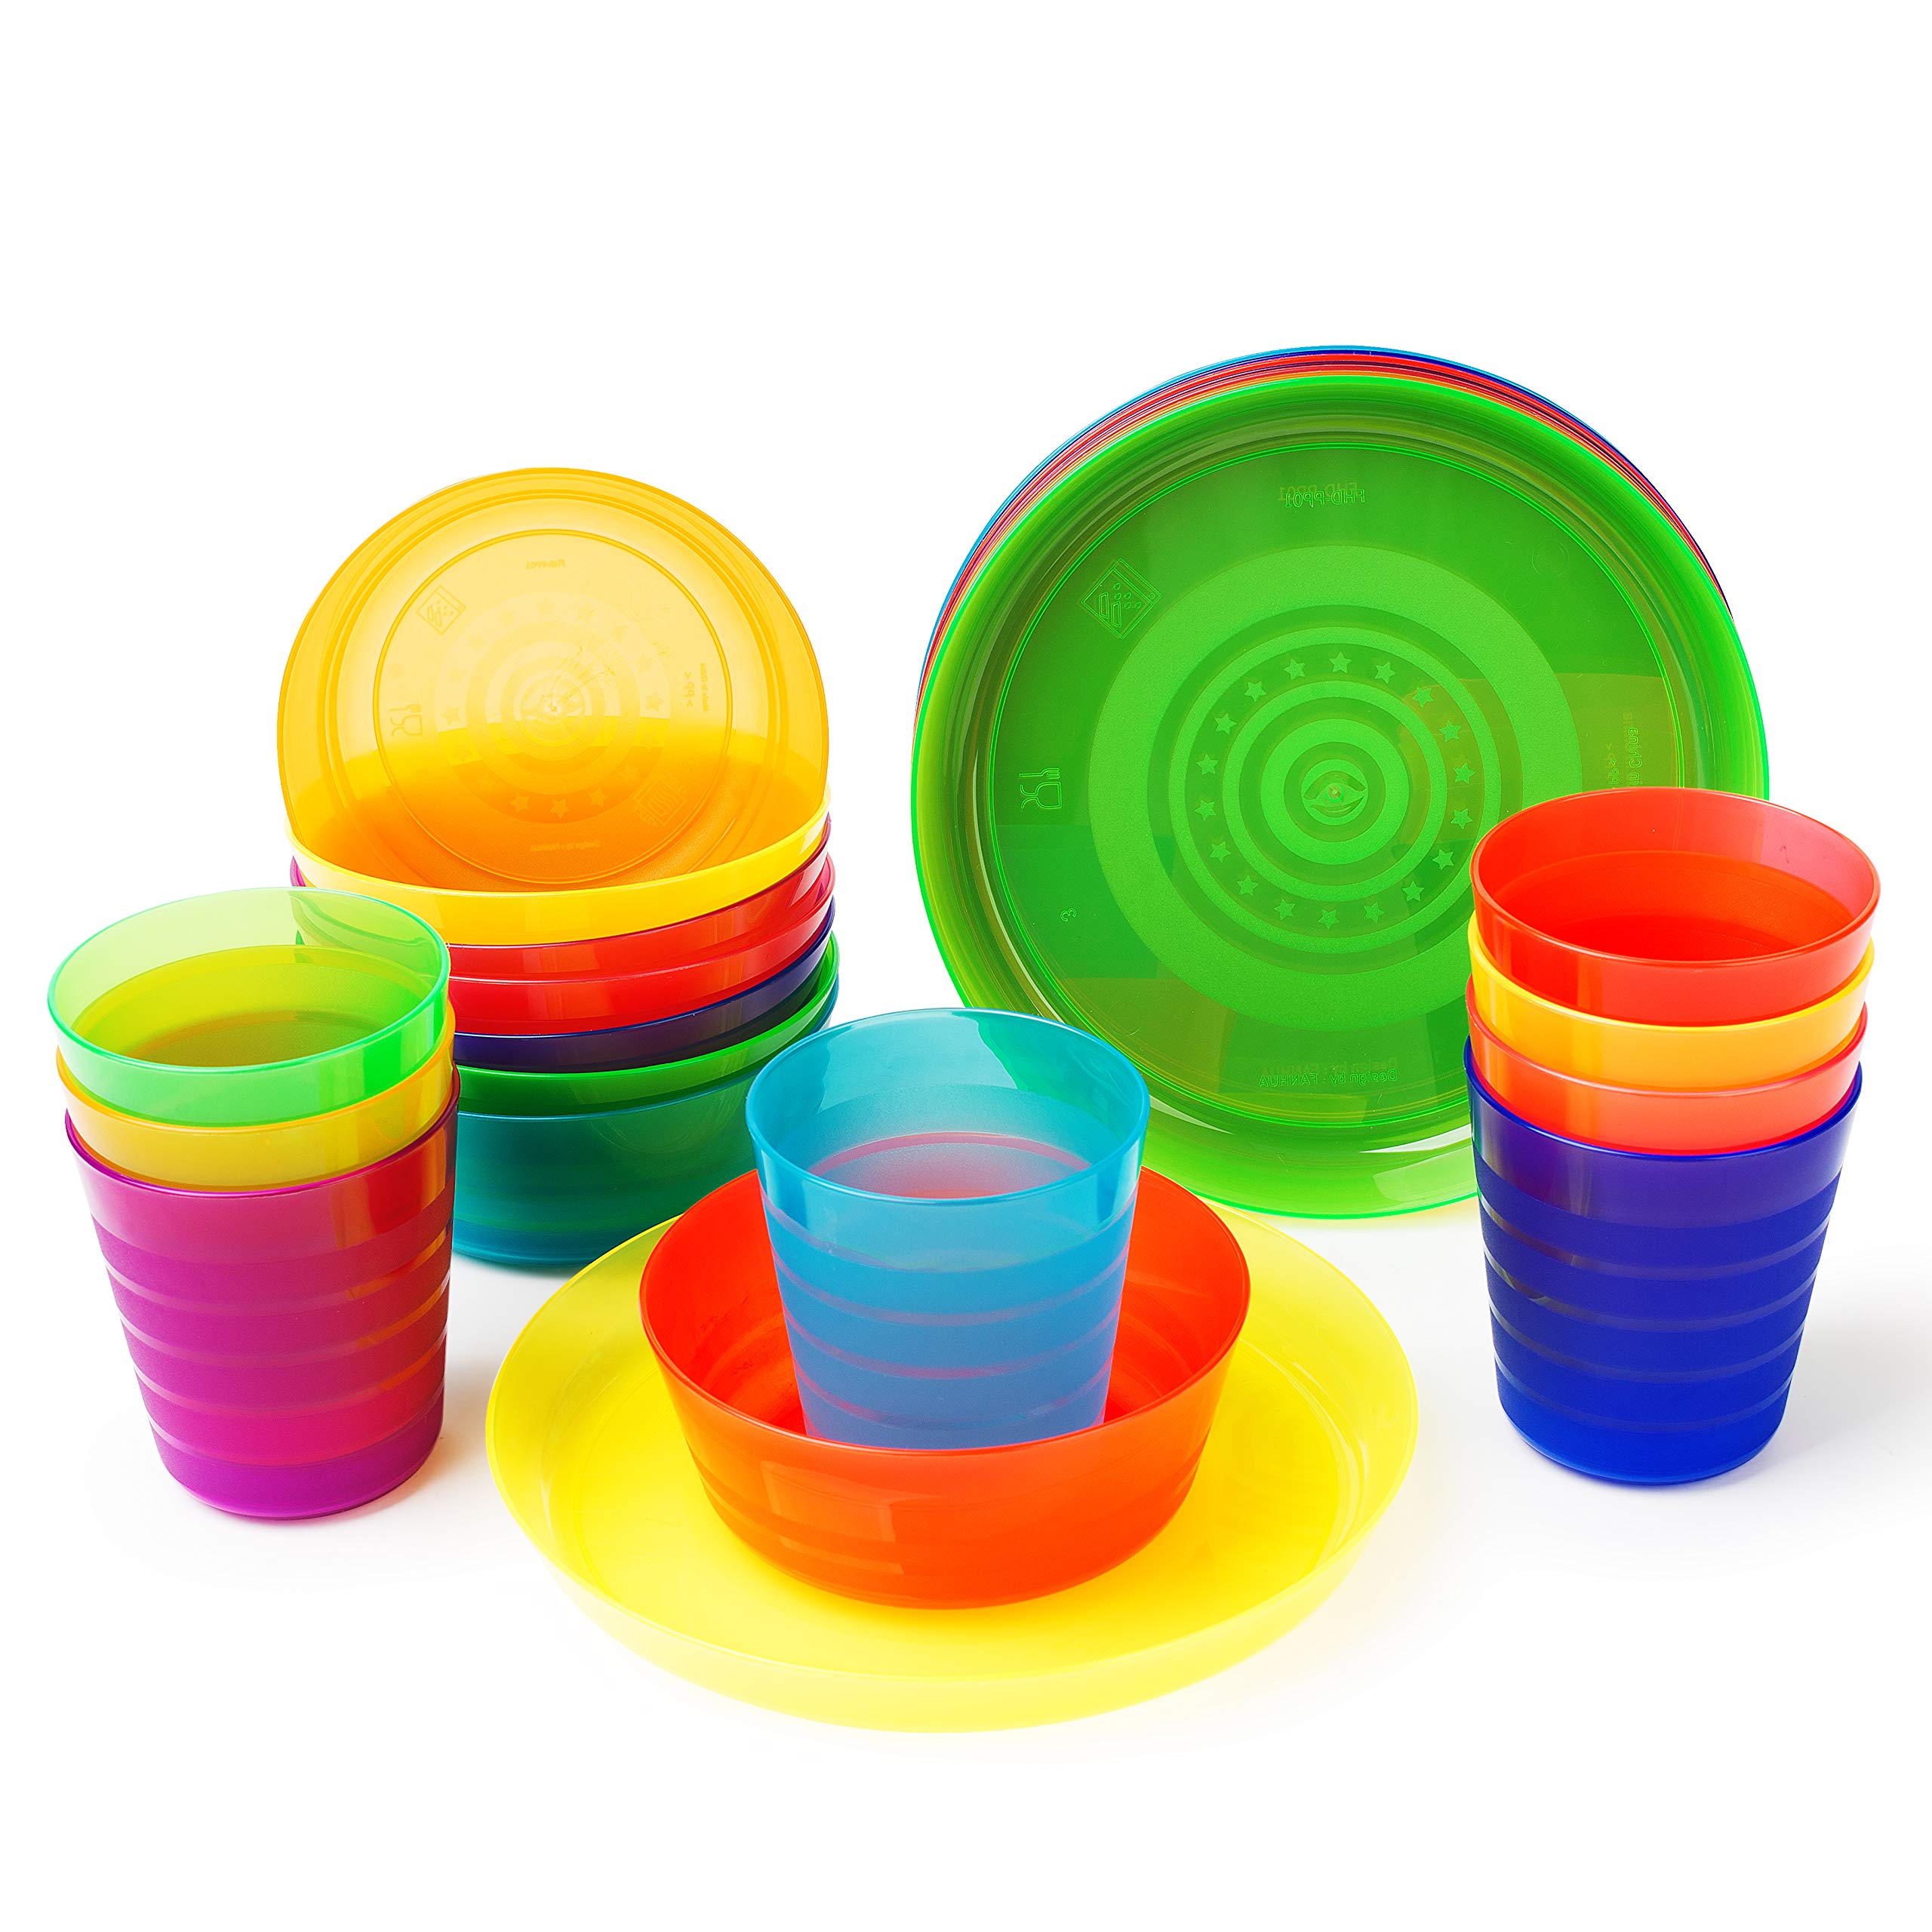 Plastic Dinnerware set for 8 | Kids dishes set include kids cups, kids plates, kids bowls | Rainbow colours for kids party indoor and camping | Reusable and Microwave Safe BPA Free for Kids & Toddler